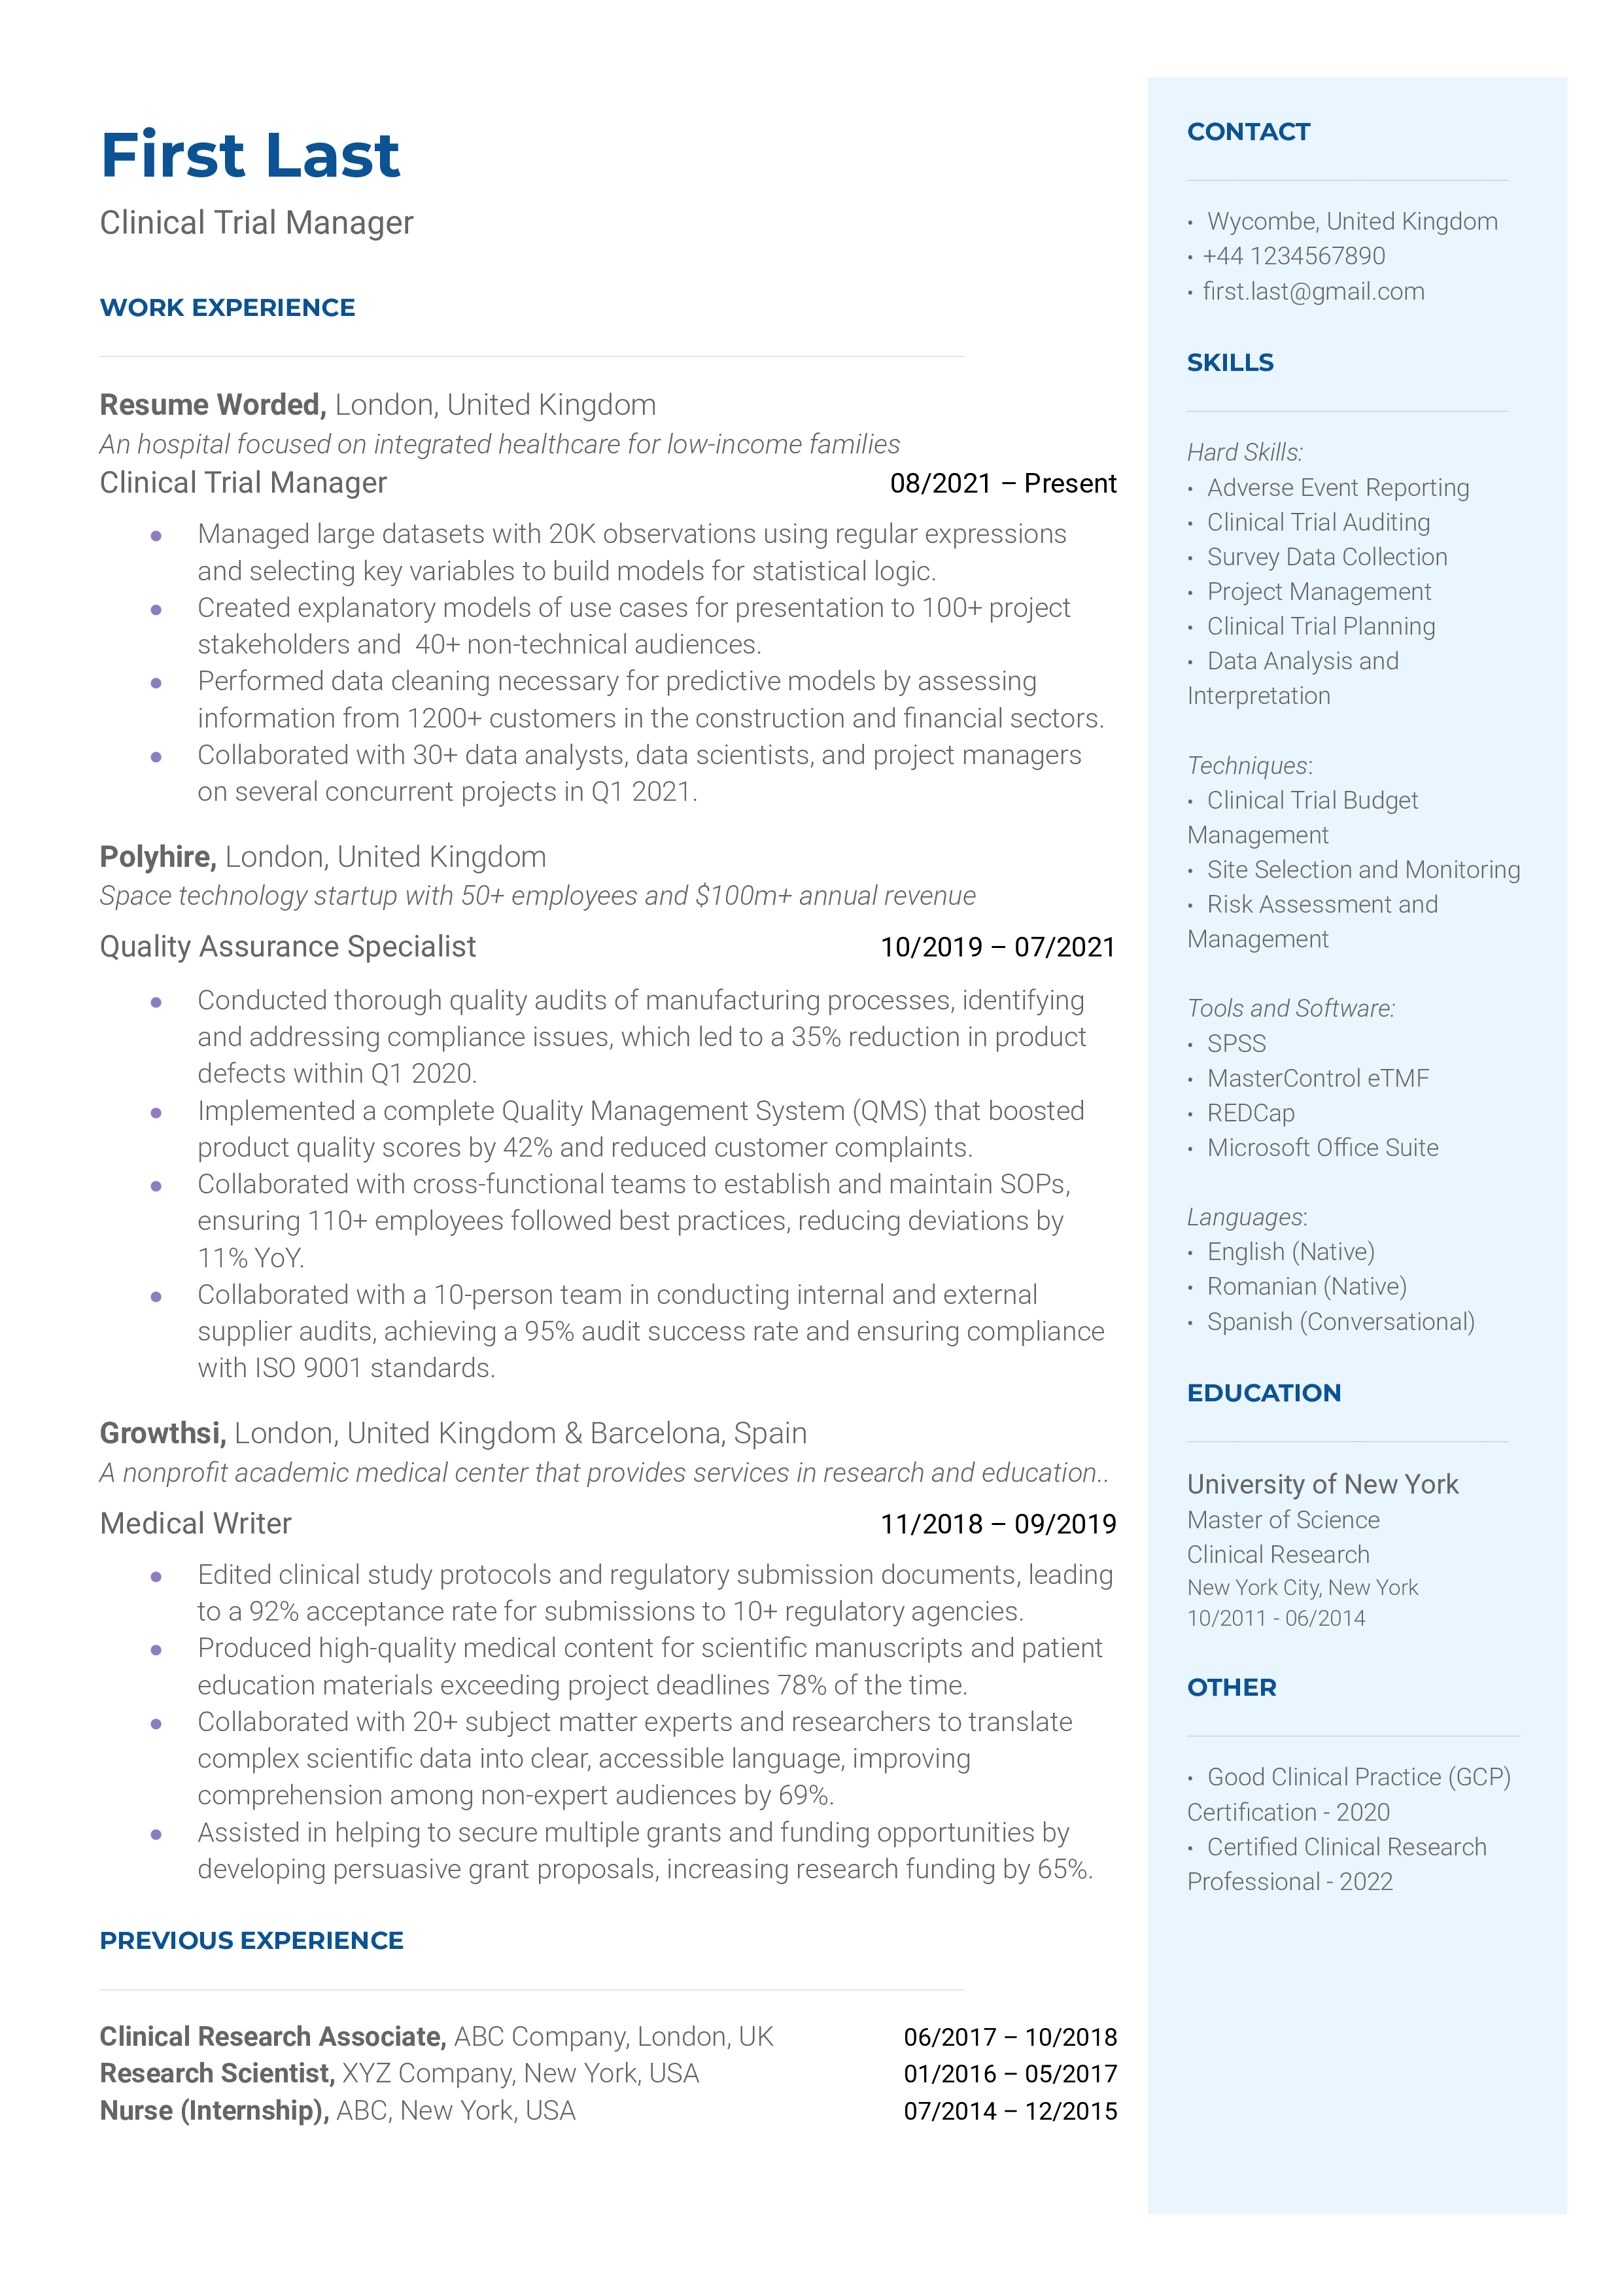 A well-structured resume for a Clinical Trial Manager showcasing relevant qualifications and technological proficiency.